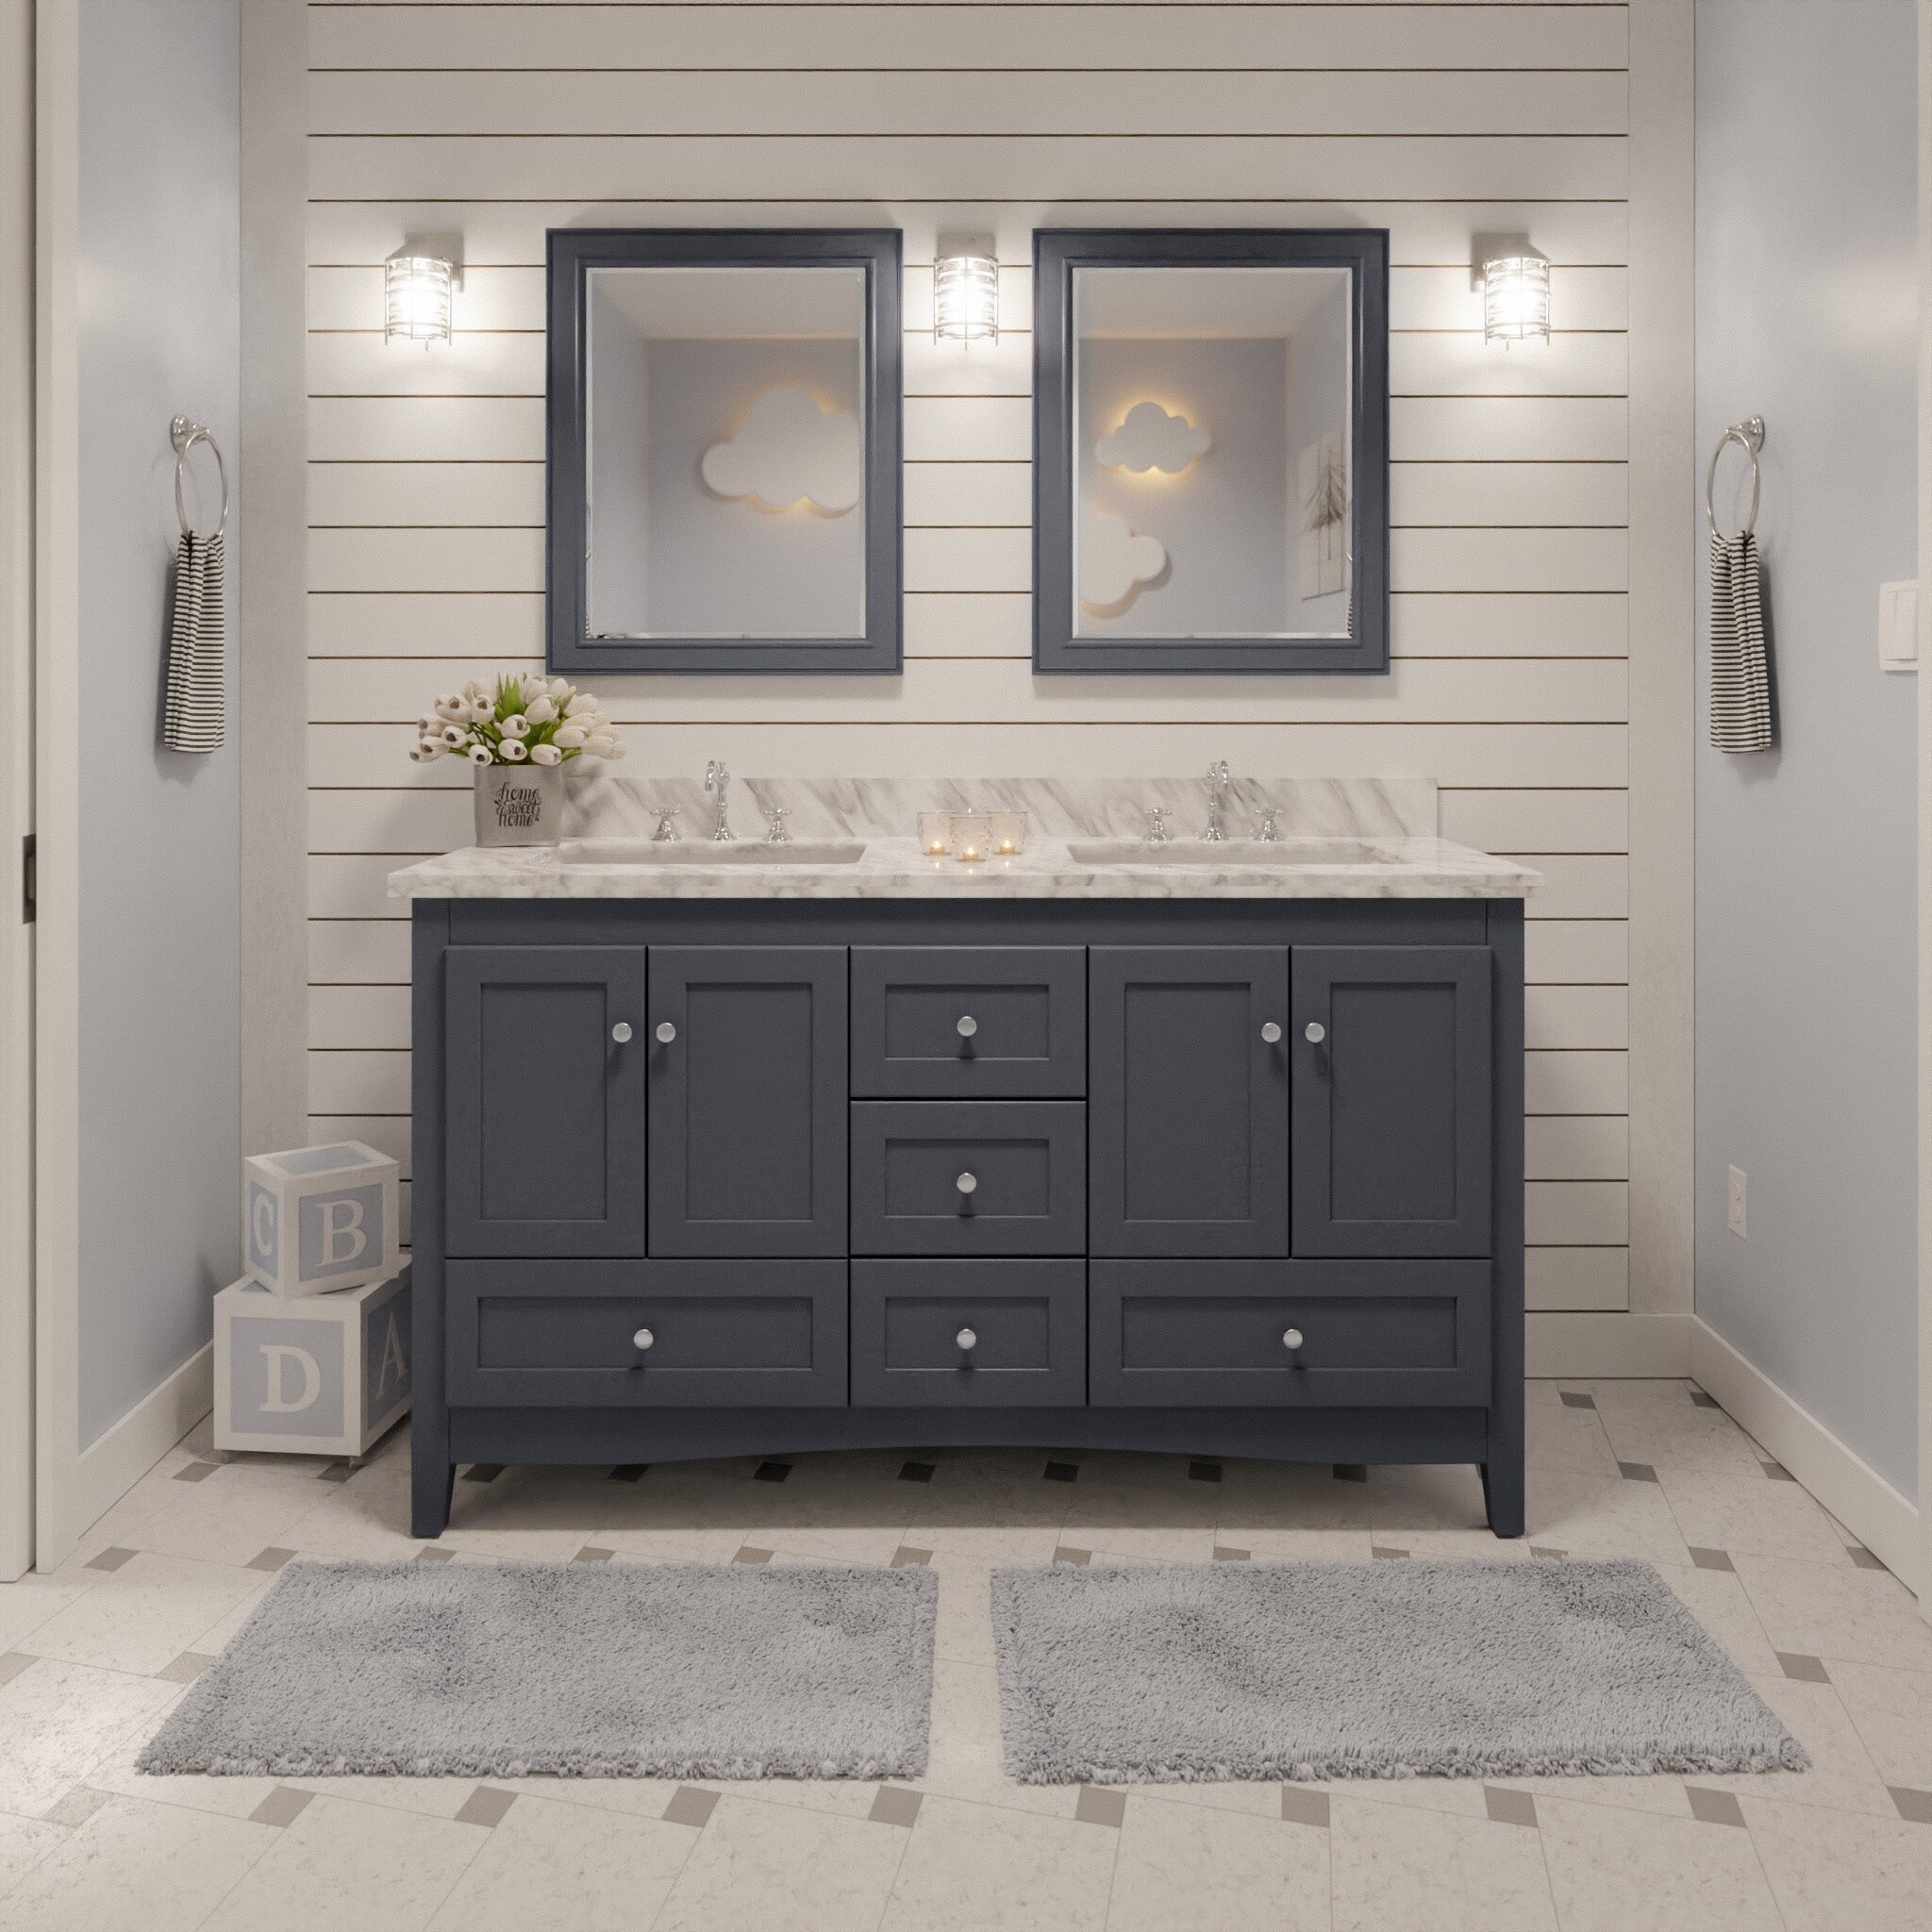 Harper 60-inch Double Vanity with Carrara Marble Top  Double vanity  bathroom, Farmhouse bathroom vanity, Bathroom vanity